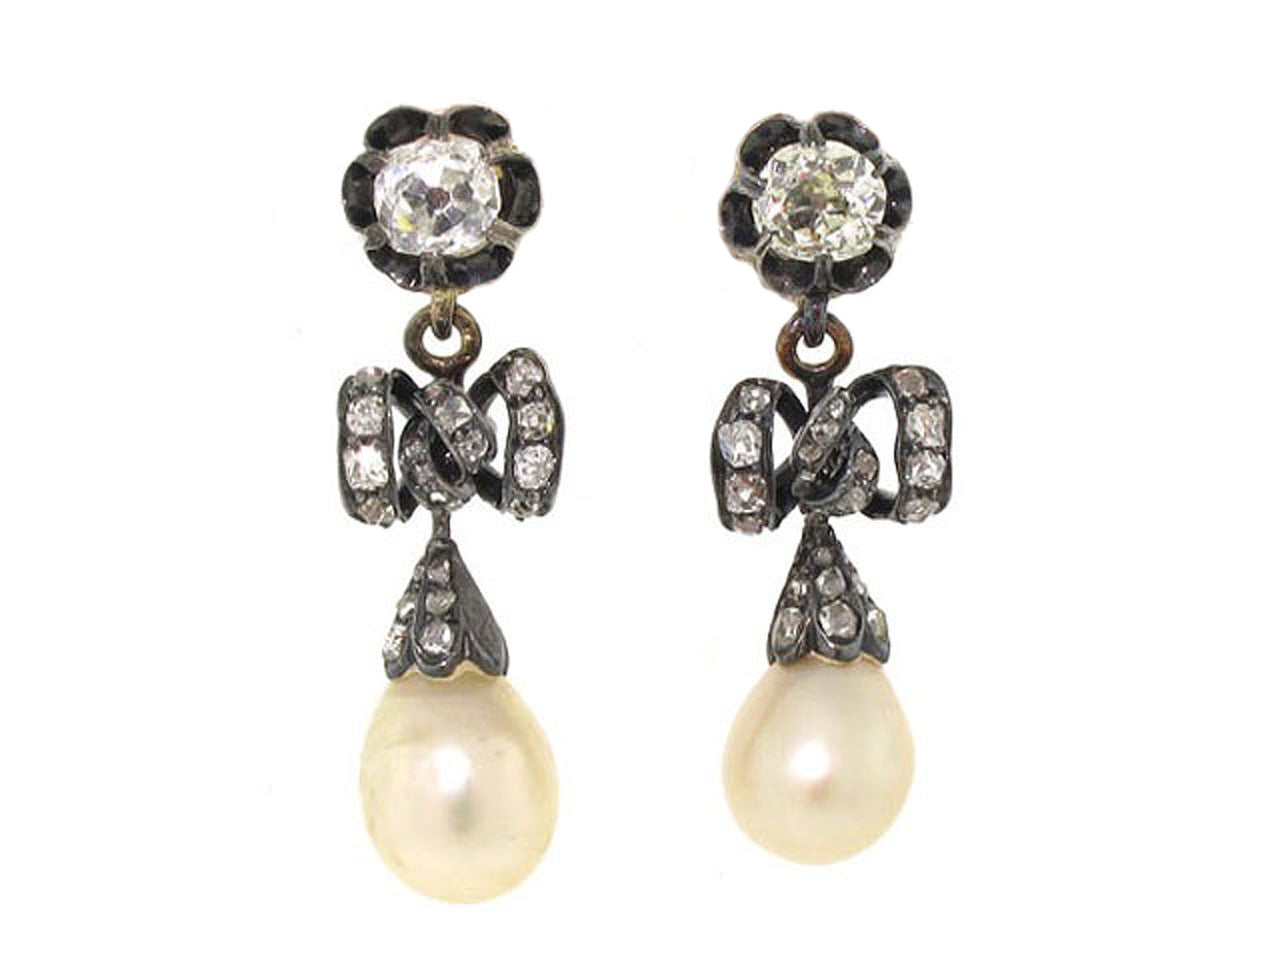 Antique Victorian Diamond and Natural Pearl Earrings in Silver and Gold